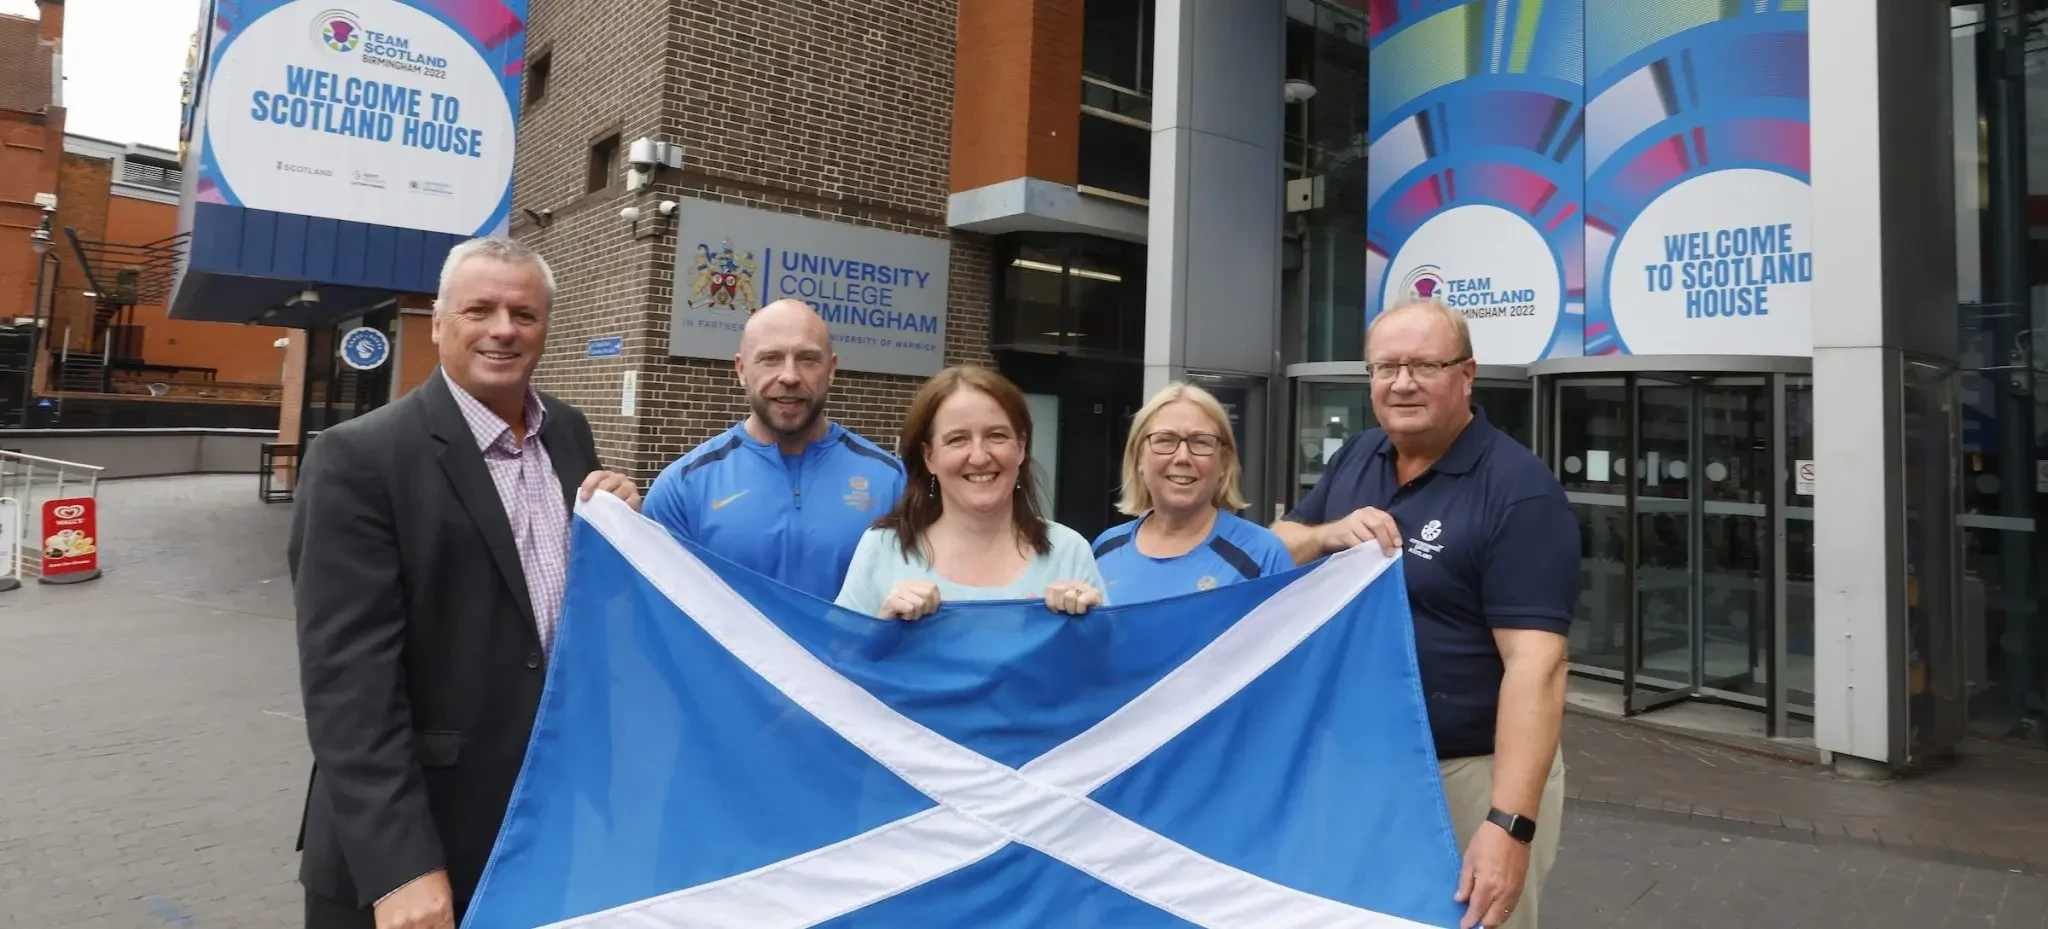 Scottish Minister for Public Health, Women's Health and Sport Maree Todd, centre, opened Scotland House at Birmingham 2022 ©Team Scotland